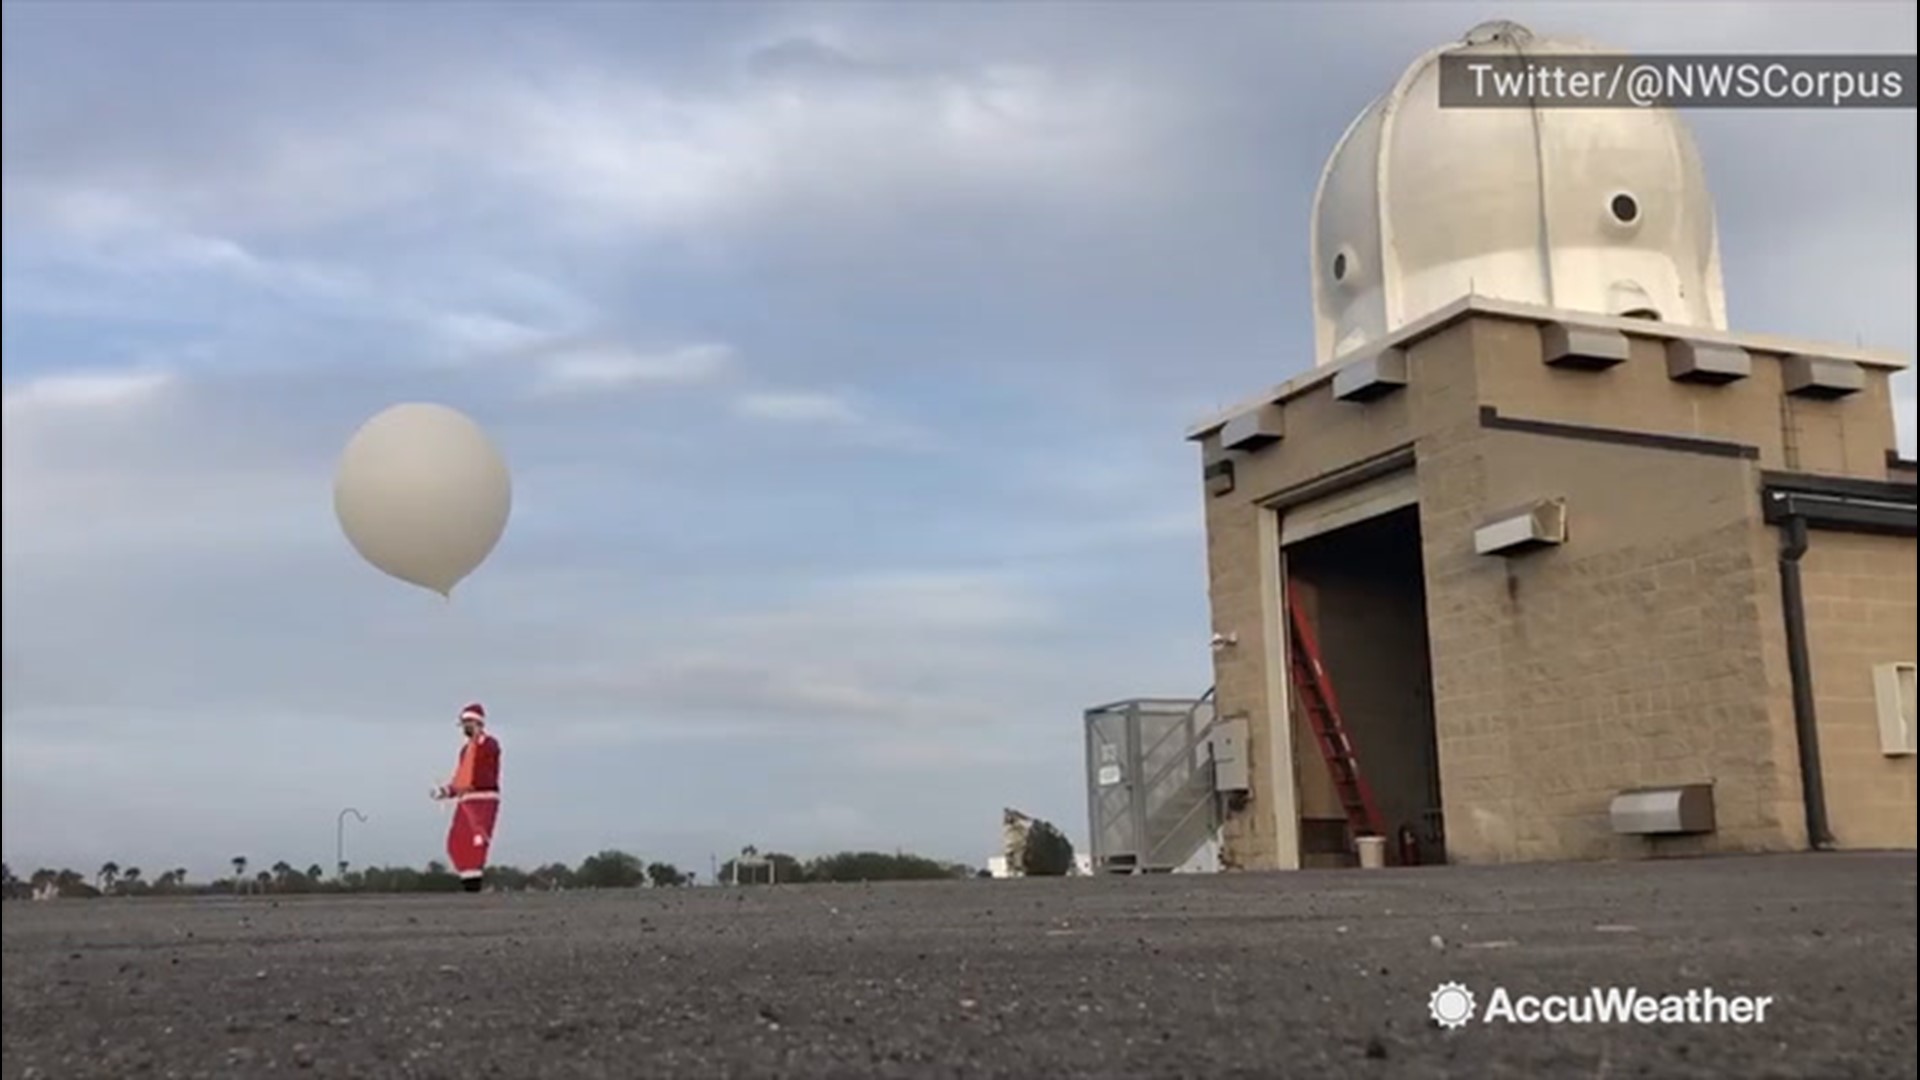 On Dec. 12, the meteorologists at the Corpus Christi, Texas, branch of the National Weather Service felt festive while sending a weather balloon into the atmosphere.